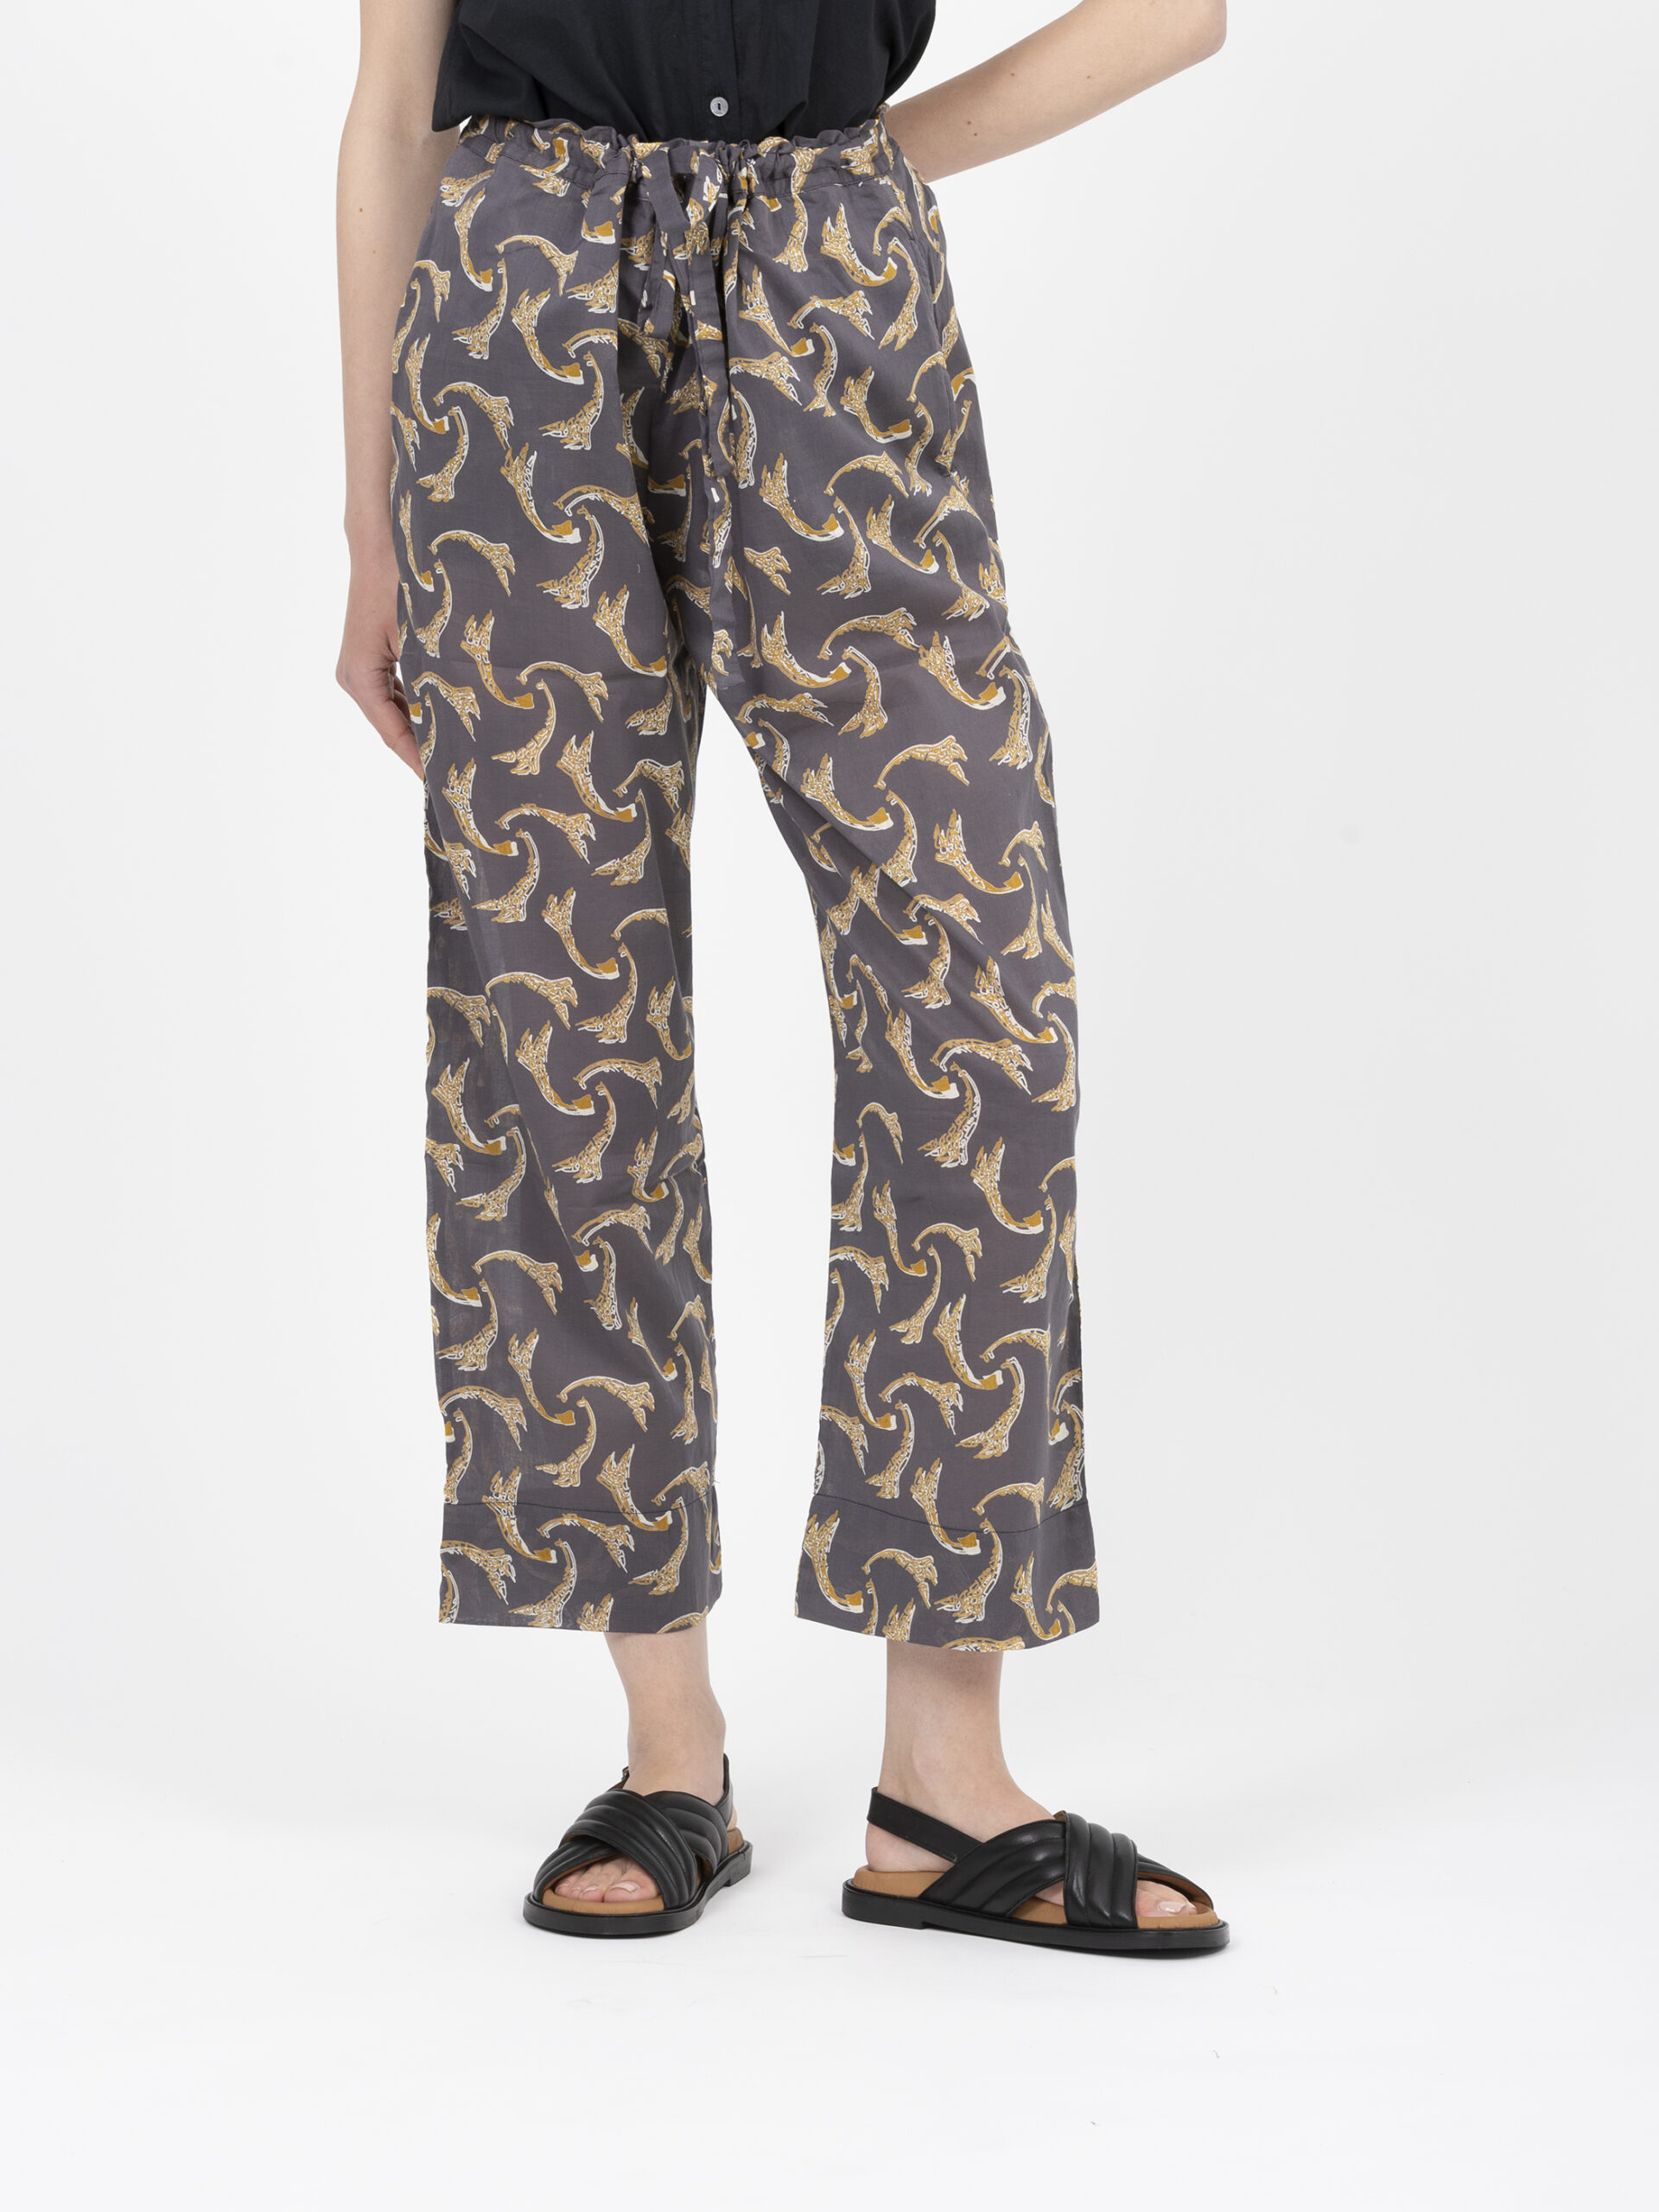 circa-giraffes-printed-cotton-pants-relaxed-voile-loose-kimale-greek-designers-matchboxathens